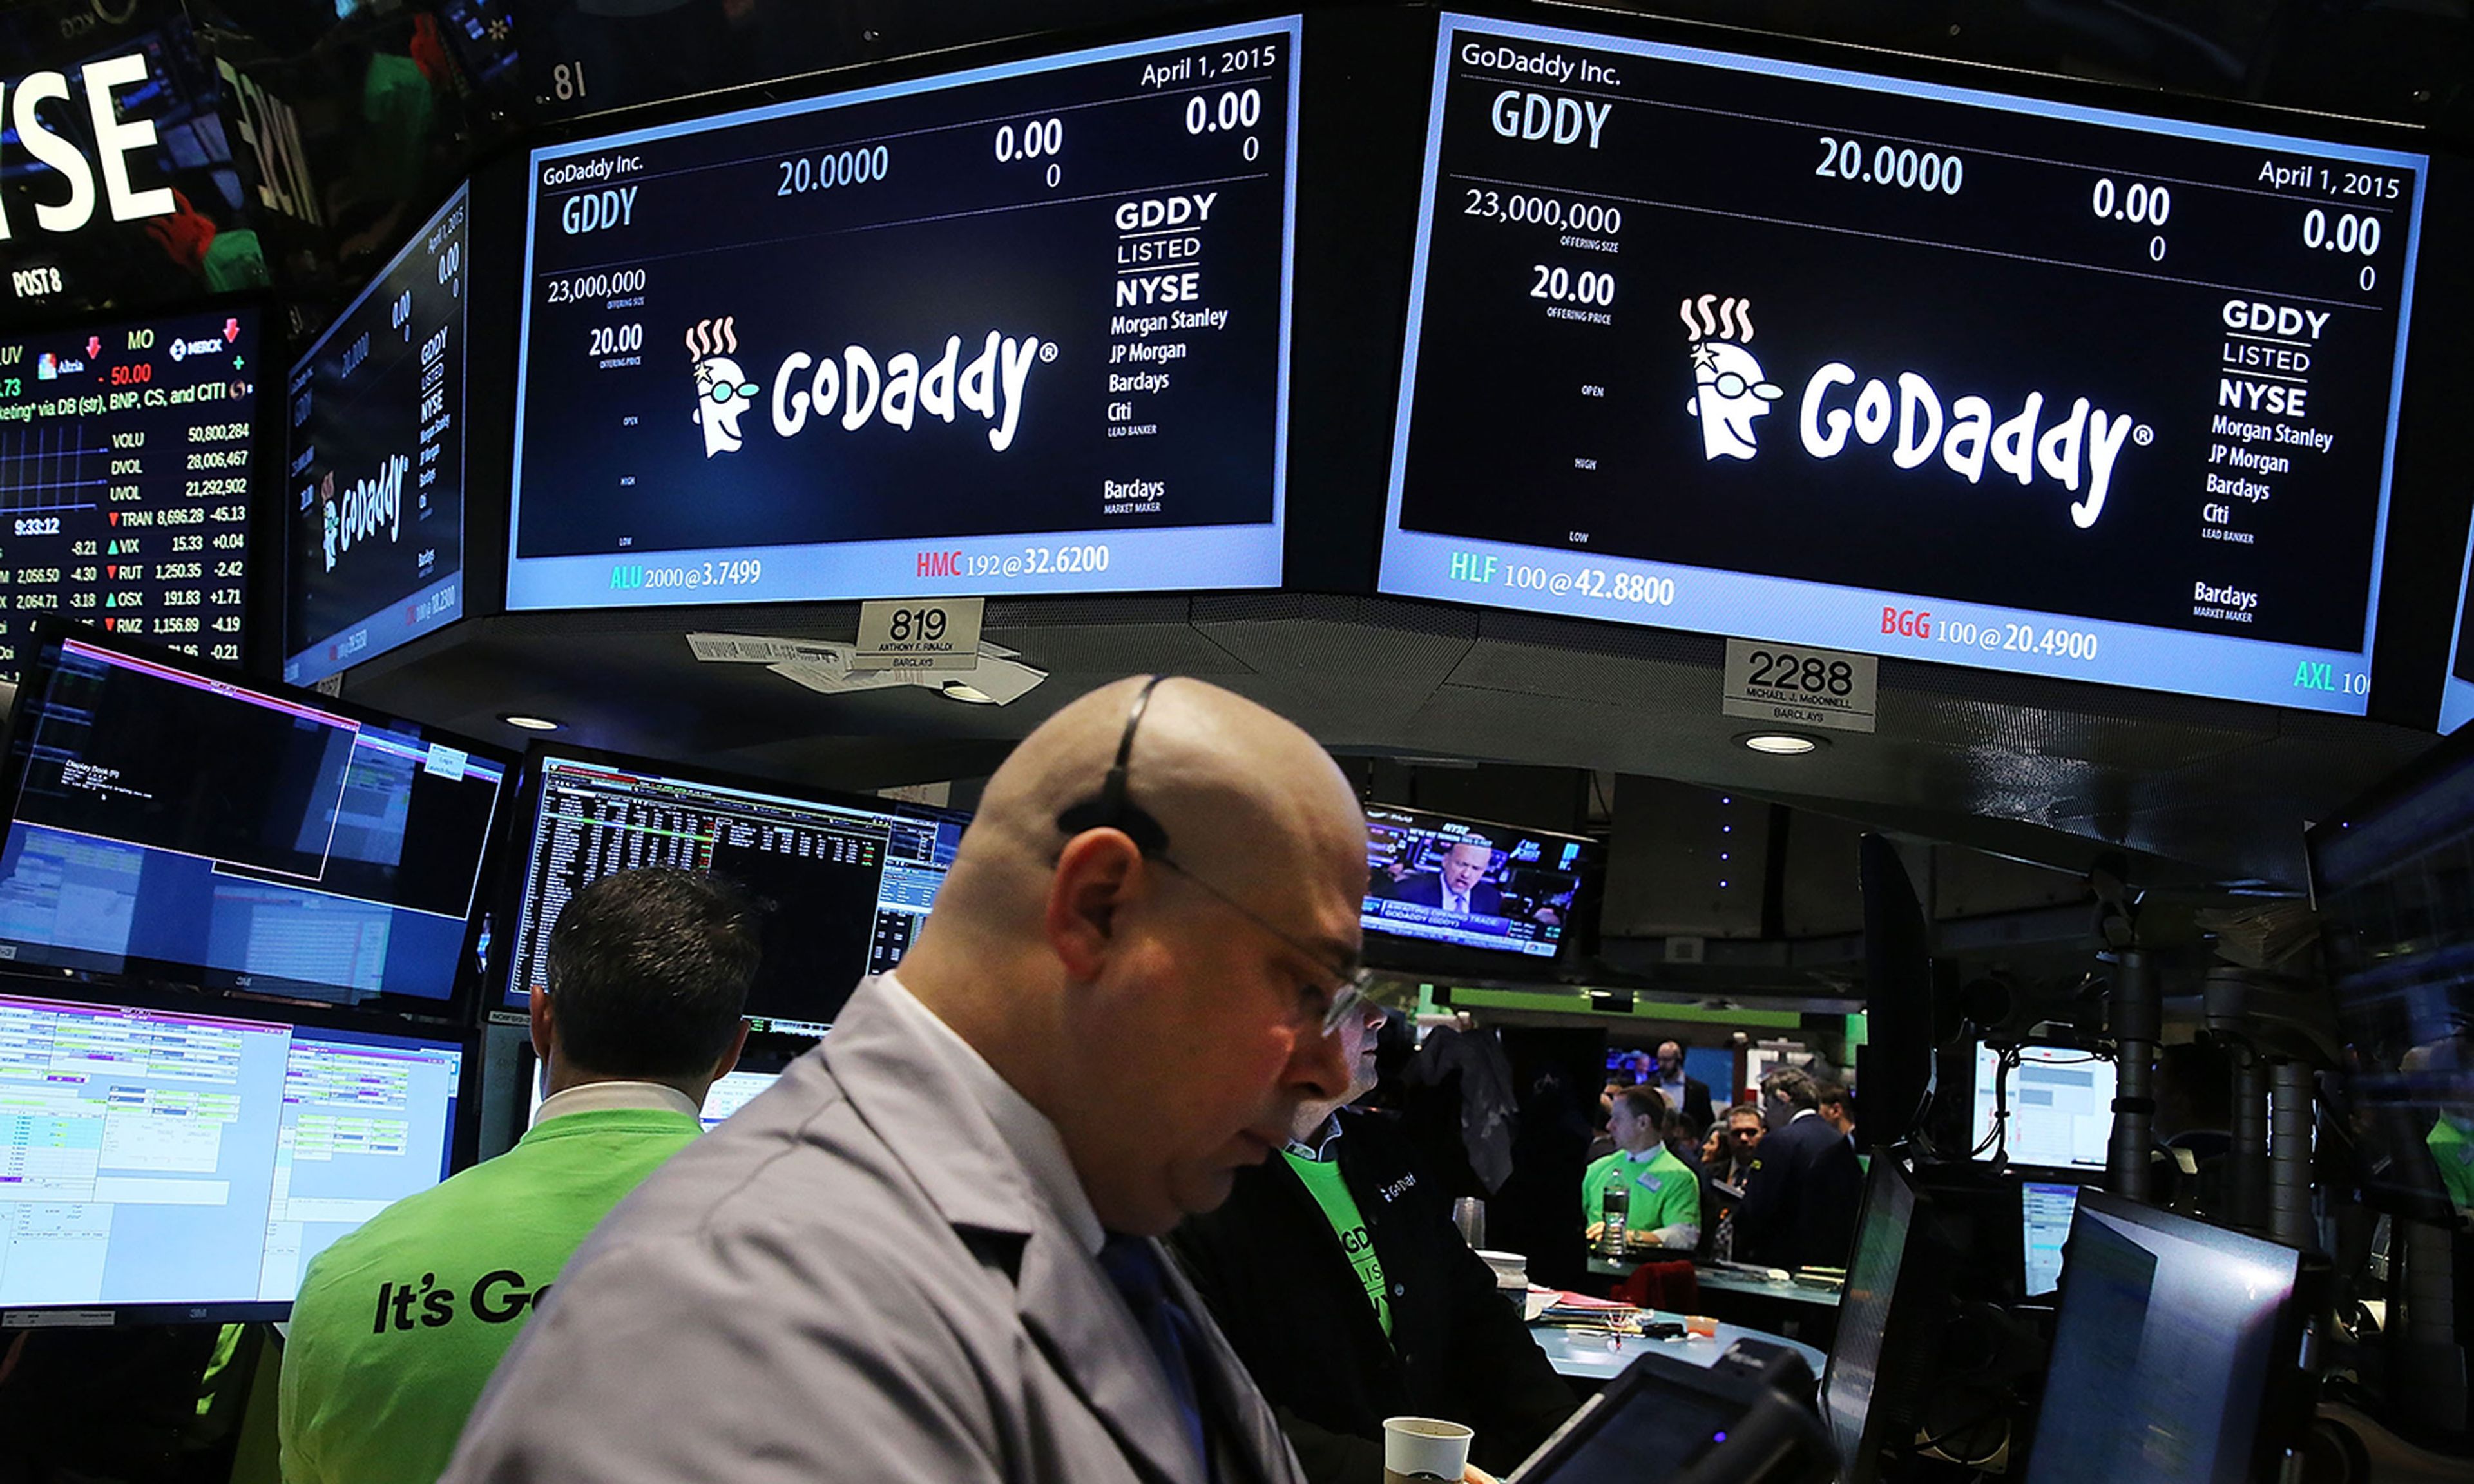 Traders work on the floor of the New York Stock Exchange as the website hosting service GoDaddy makes its initial public offering (IPO) on April 1, 2015, in New York City. (Photo by Spencer Platt/Getty Images)